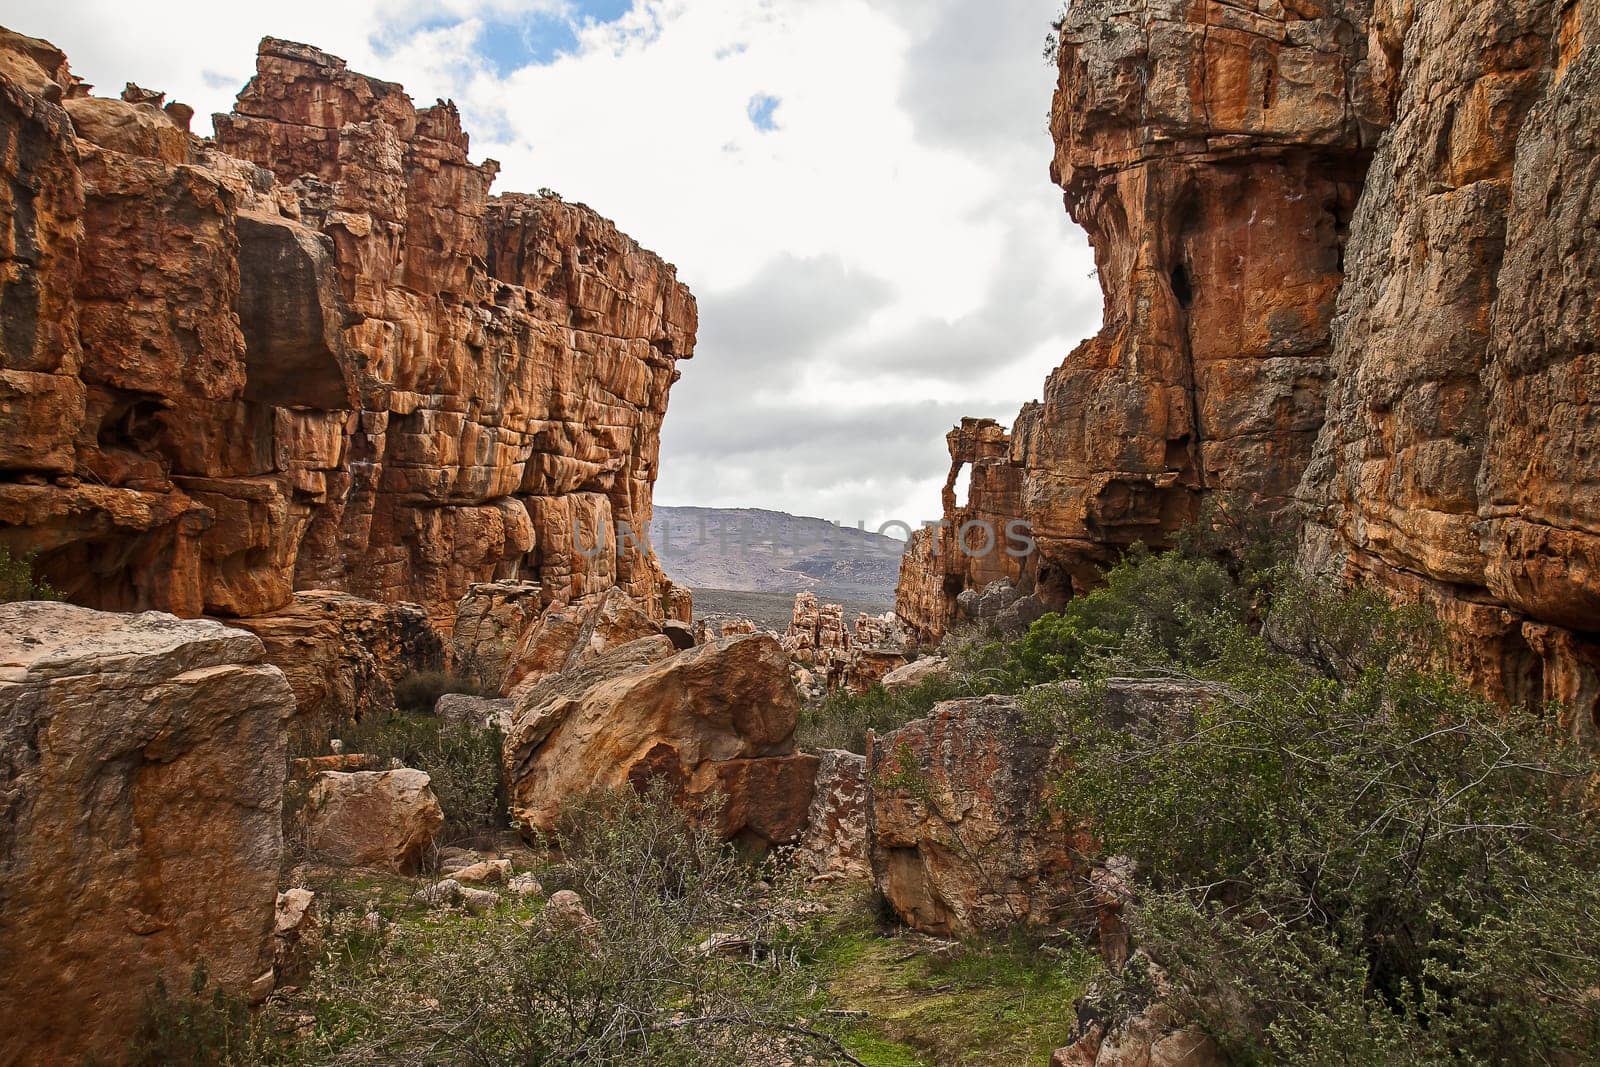 Cederberg Rock Formations 12908 by kobus_peche